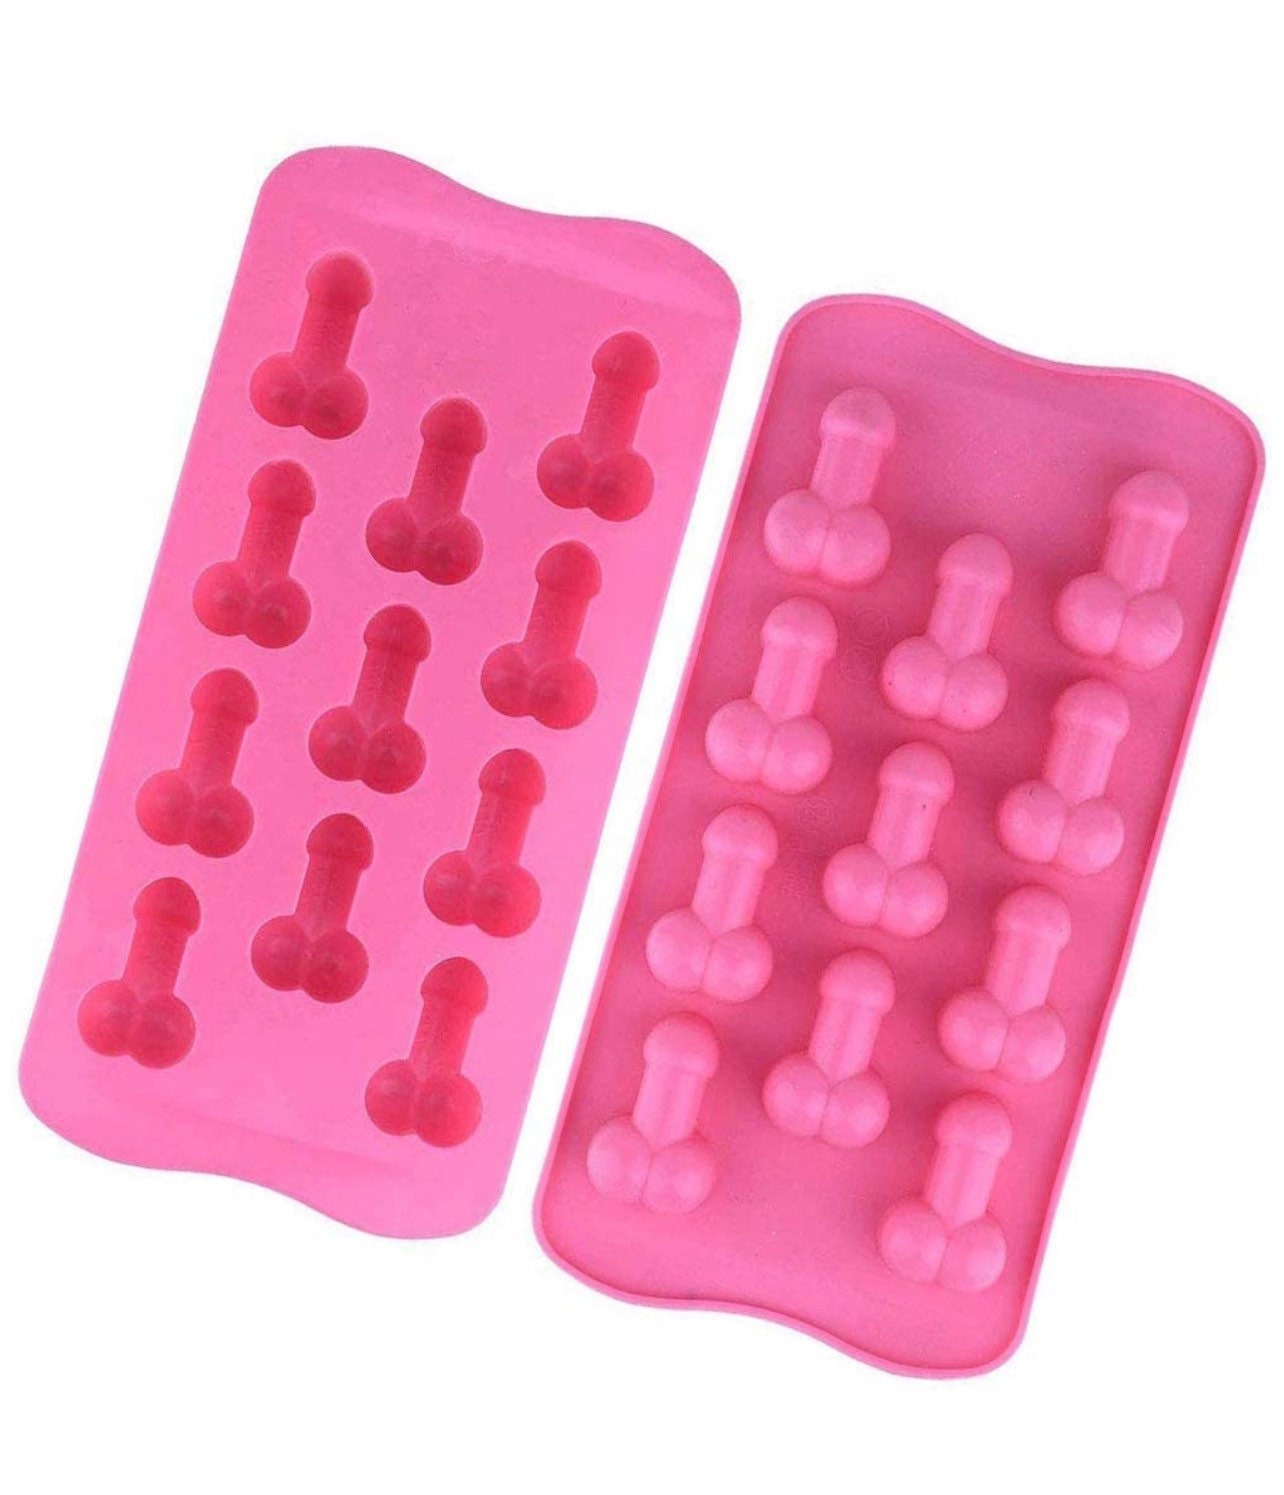 Sexy Penis Cake Mold Dick Ice Cube Tray Silicone Soap Candle Moulds Sugar  Craft Tools Chocolate Mould Mini Cream Forms 220701 From Zhao10, $3.26